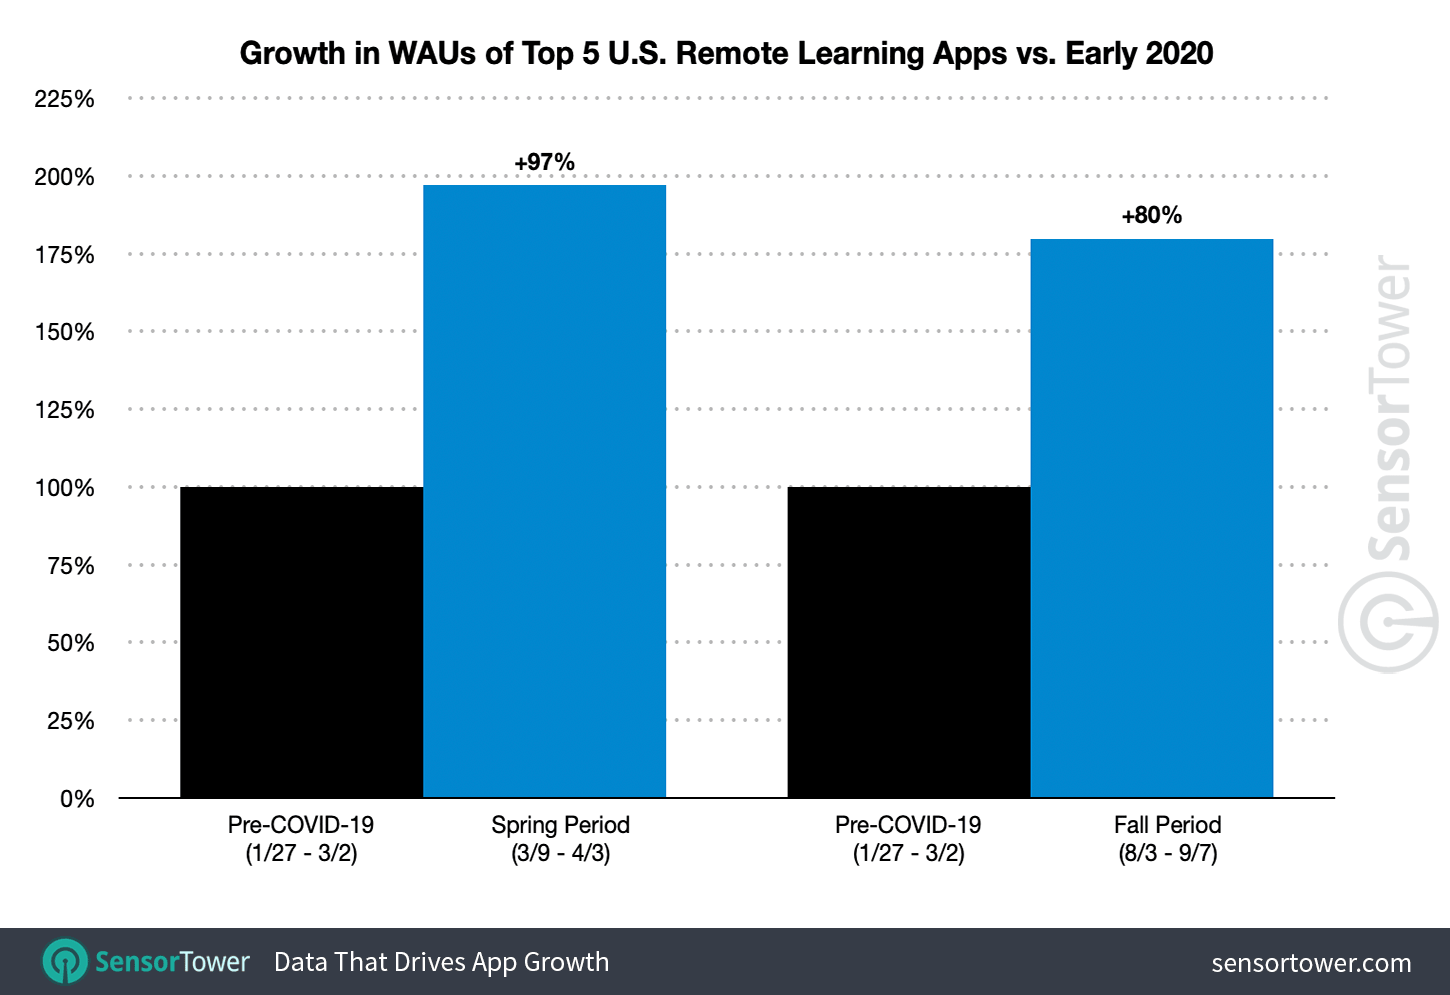 In the fall, the top five U.S. remote learning apps' WAUs surged to 91% of the spring semester level